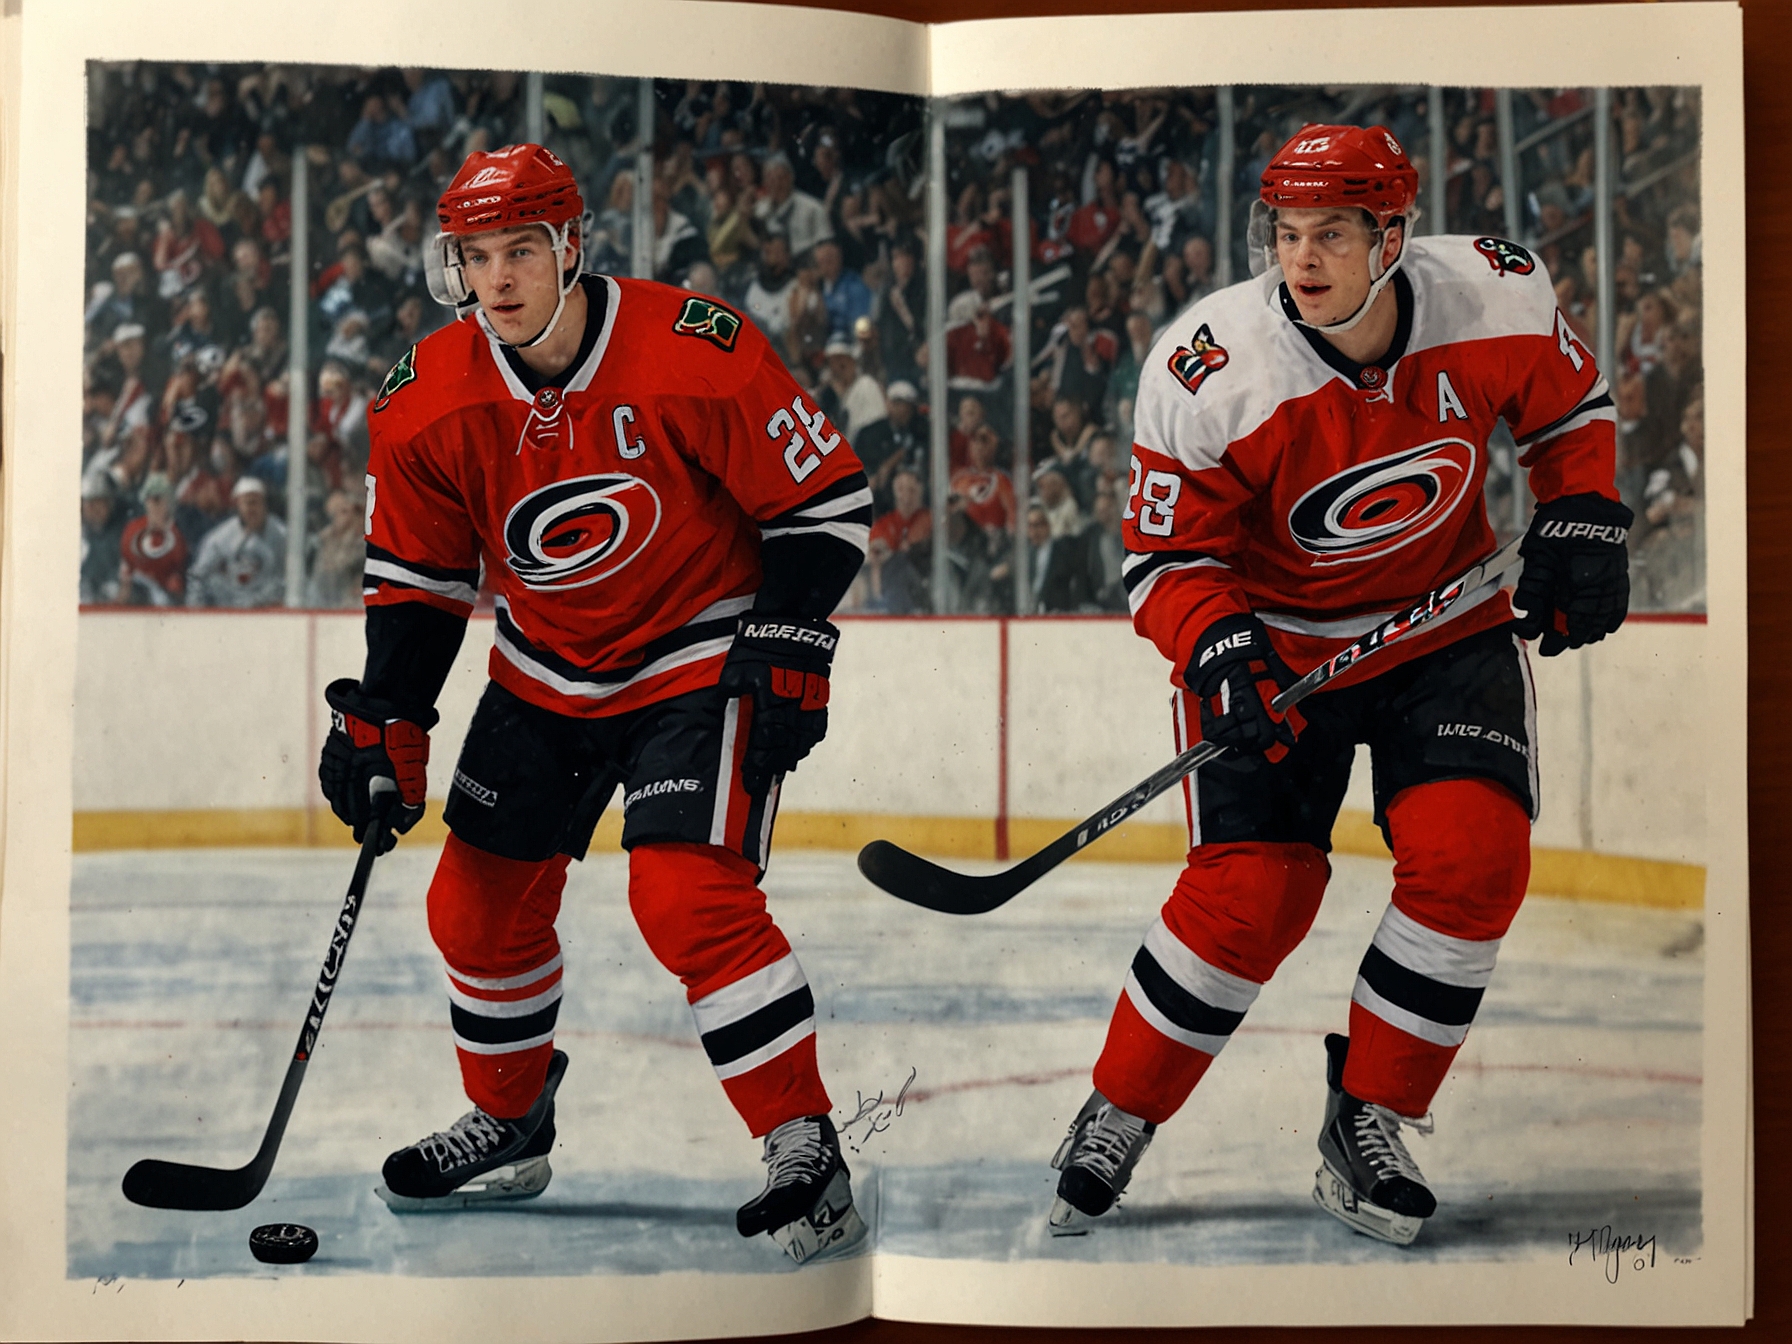 A collage of action shots featuring Dylan Coghlan, Jack Drury, Seth Jarvis, and Martin Necas on the ice, highlighting their skills and importance to the Carolina Hurricanes' future success.